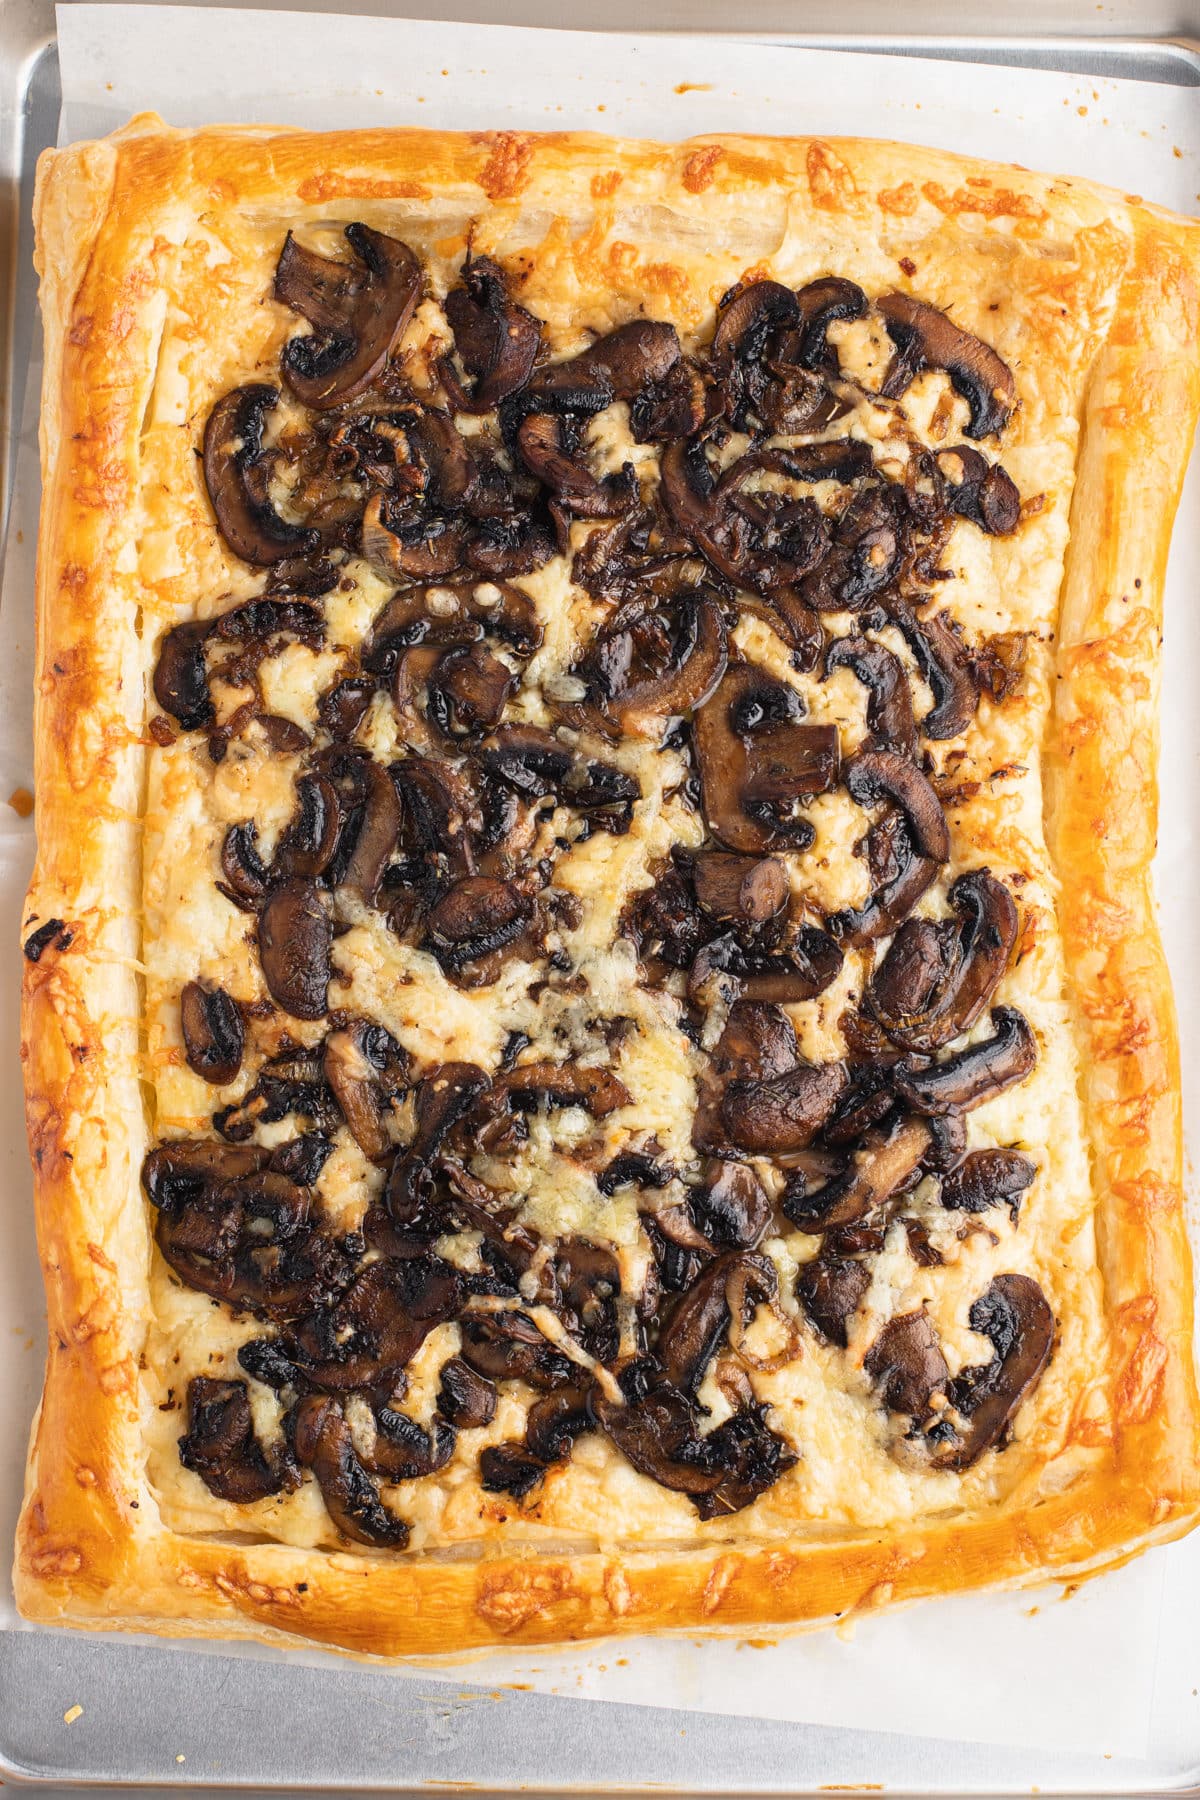 Cheese and mushrooms topping a puff pastry sheet.